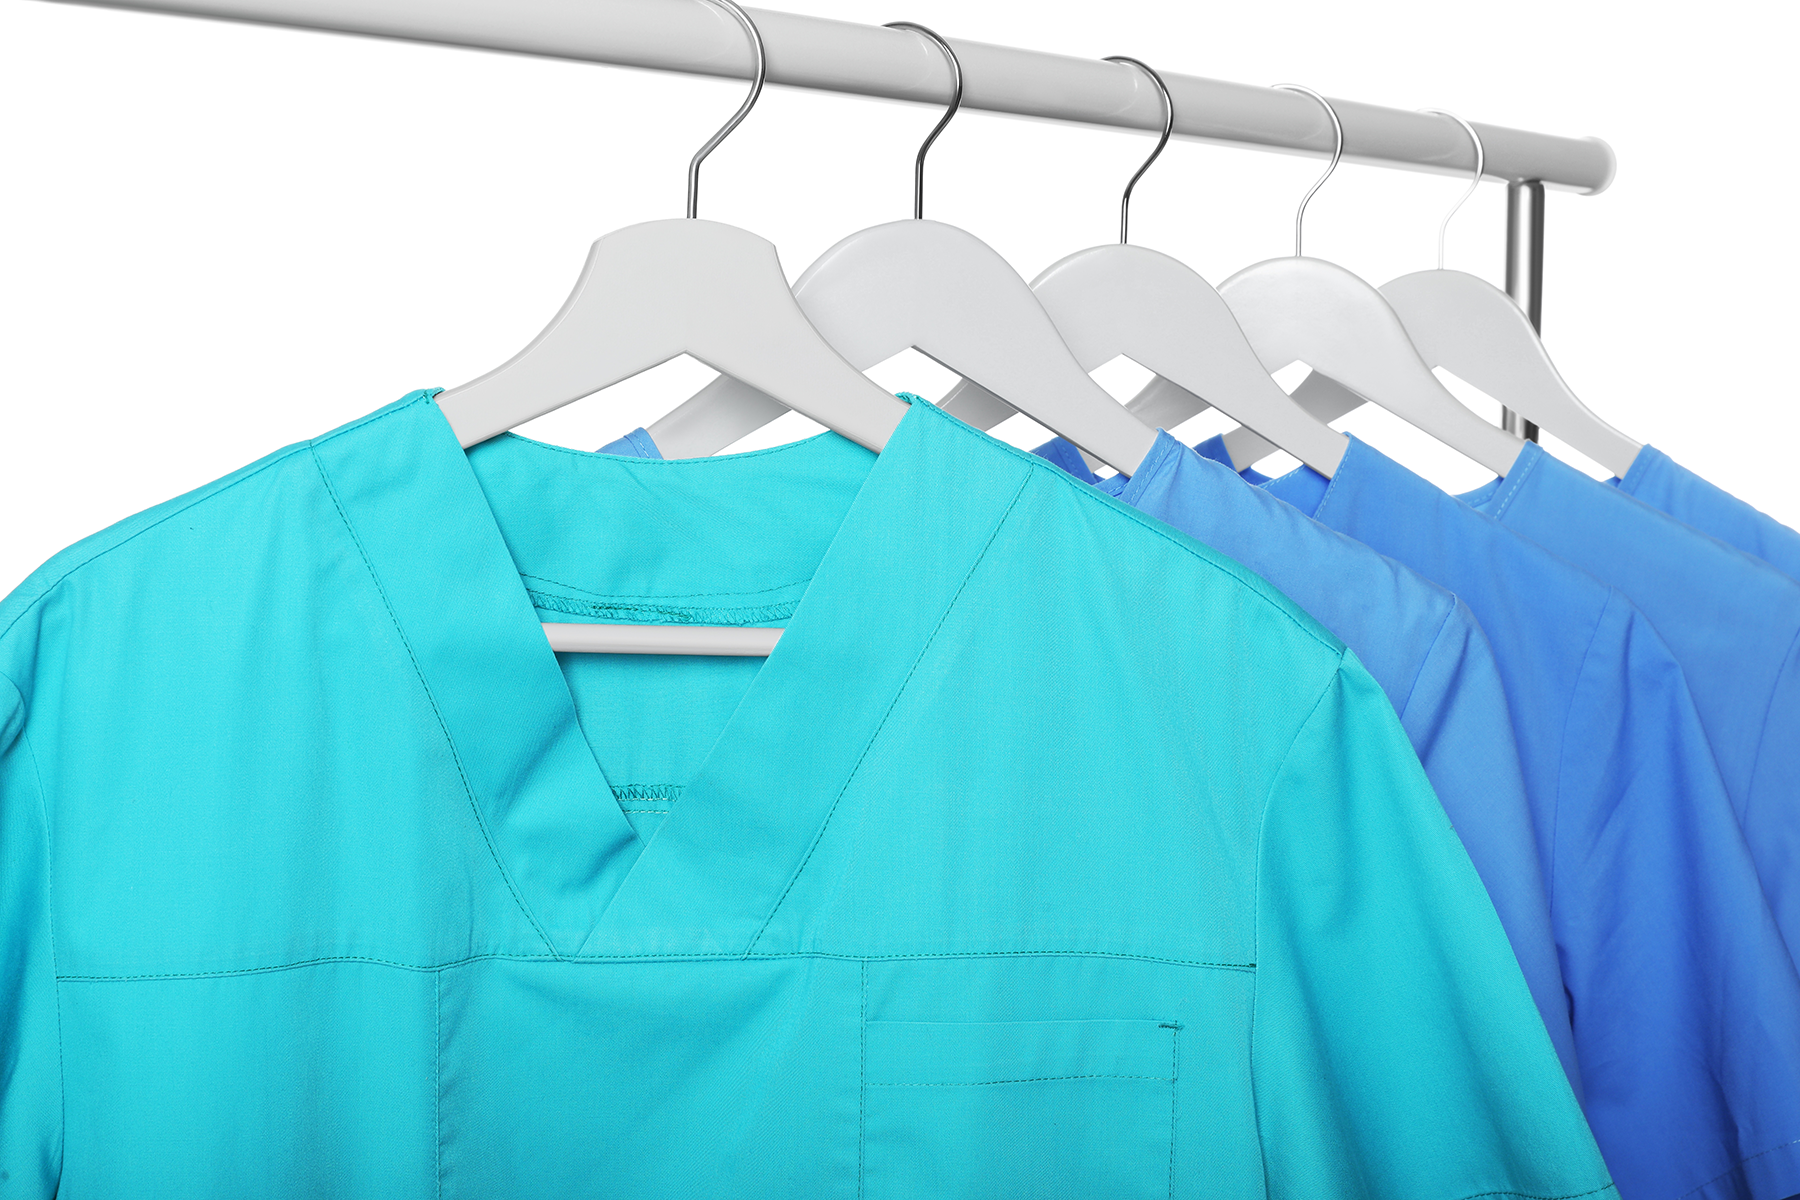 The Role of Modern Scrub Technology in Hygiene and Comfort - Turquoise and light blue medical uniforms on rack against white background | Image Credit: New Africa / stock.adobe.com